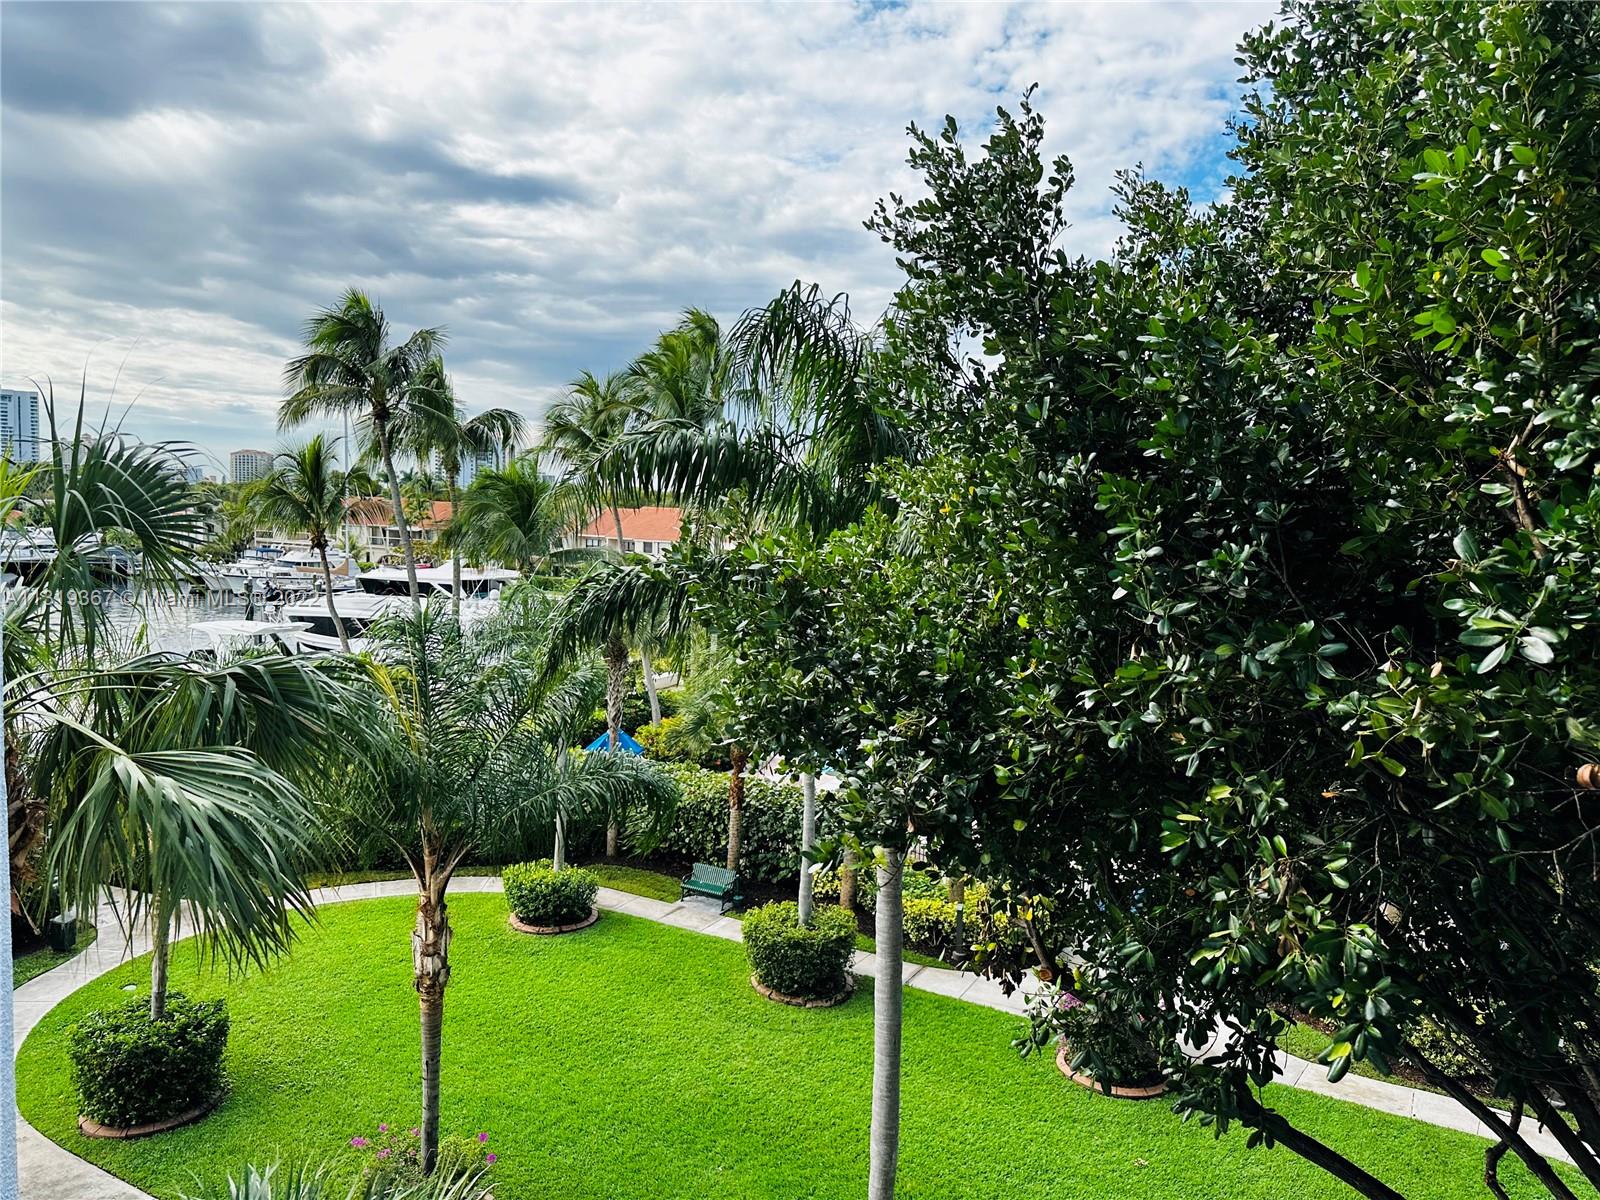 Remodeled 2 Bd. 2 Bth. unit with open kitchen in beautiful luxurious Portsview on the Waterways in Aventura.  Very quiet building with no traffic or noise.  Washer and Dryer in the unit. 2 assigned parking spaces and plenty of guest parking. Amenities include 2 pools, 2 hot tubs, sauna, 2 tennis courts, new state of the art gym, bike room, large air conditioned storage unit, 24 hour security and a pet friendly building.   Located in one of the best areas in Aventura with direct access to the Waterways Marina and shops. Short walk to marina, intracoastal, coffee shop, restaurants, market, post office, and close to both international airports. Great shopping and fine dining close by in Gulfstream Park and Aventura Mall!